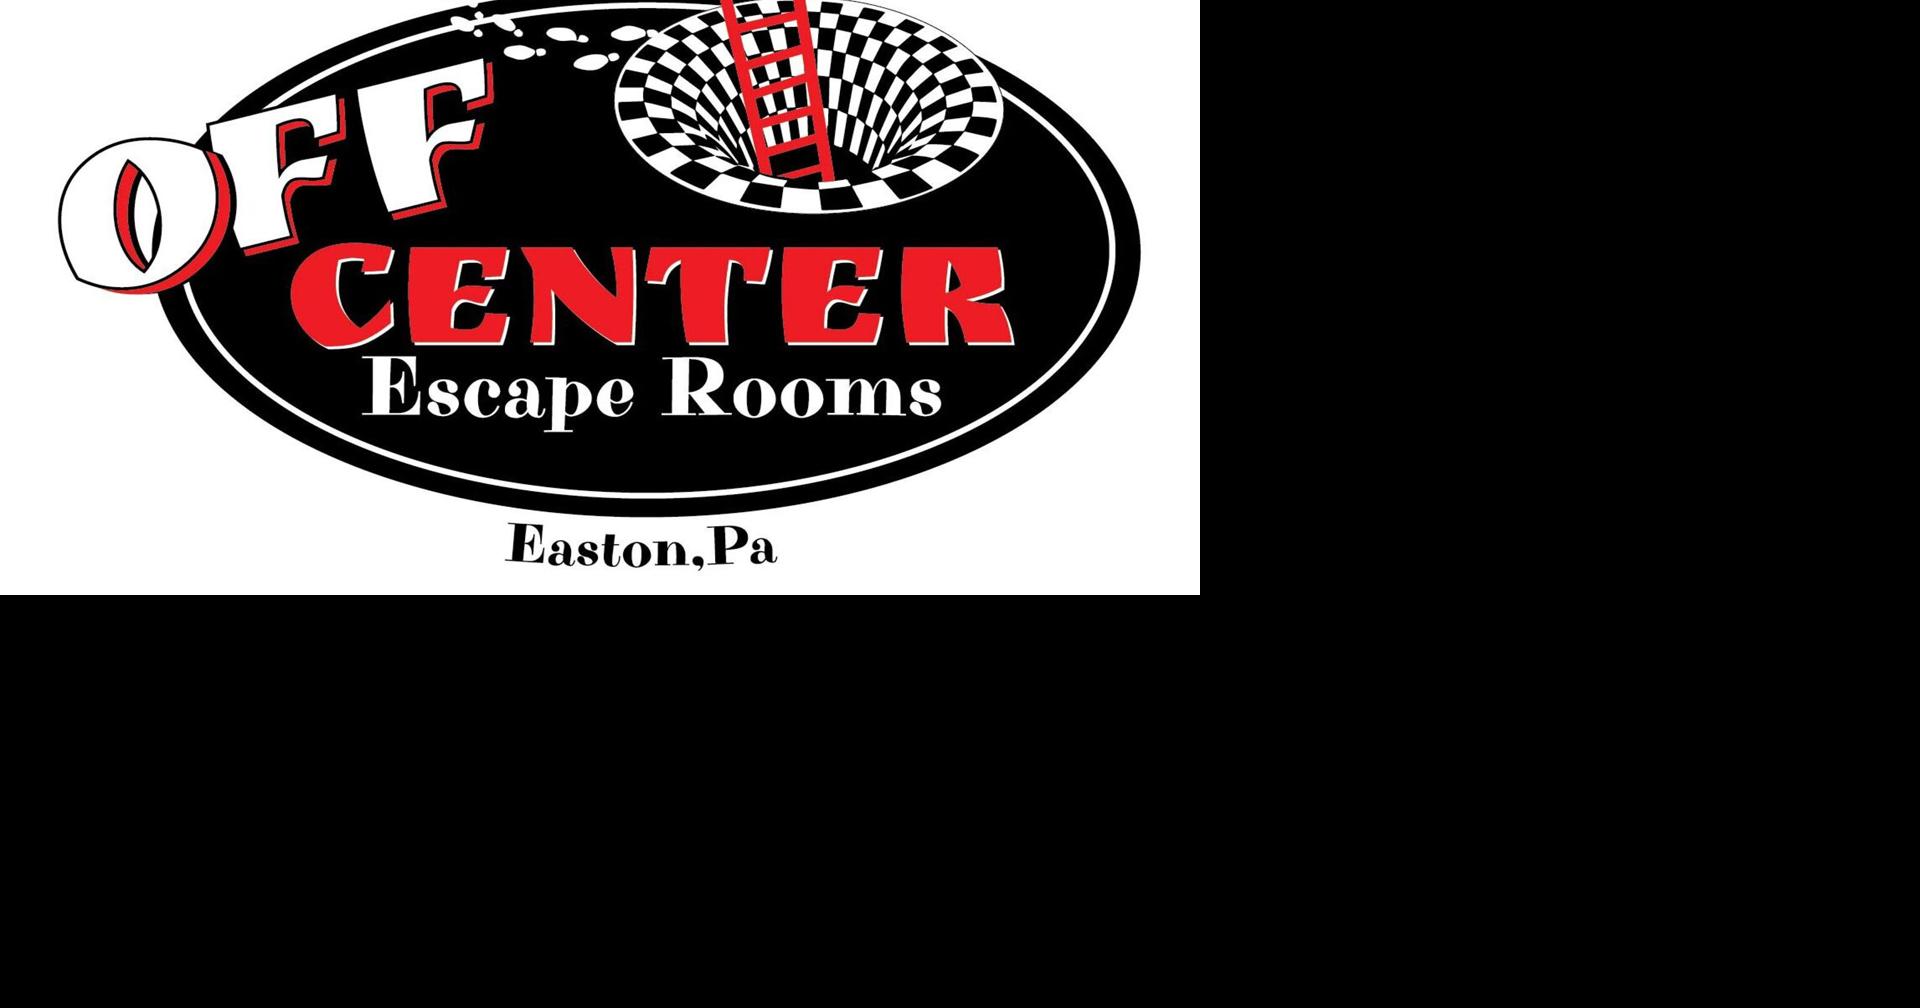 New Room Alert! We are excited - Captured LV Escape Room